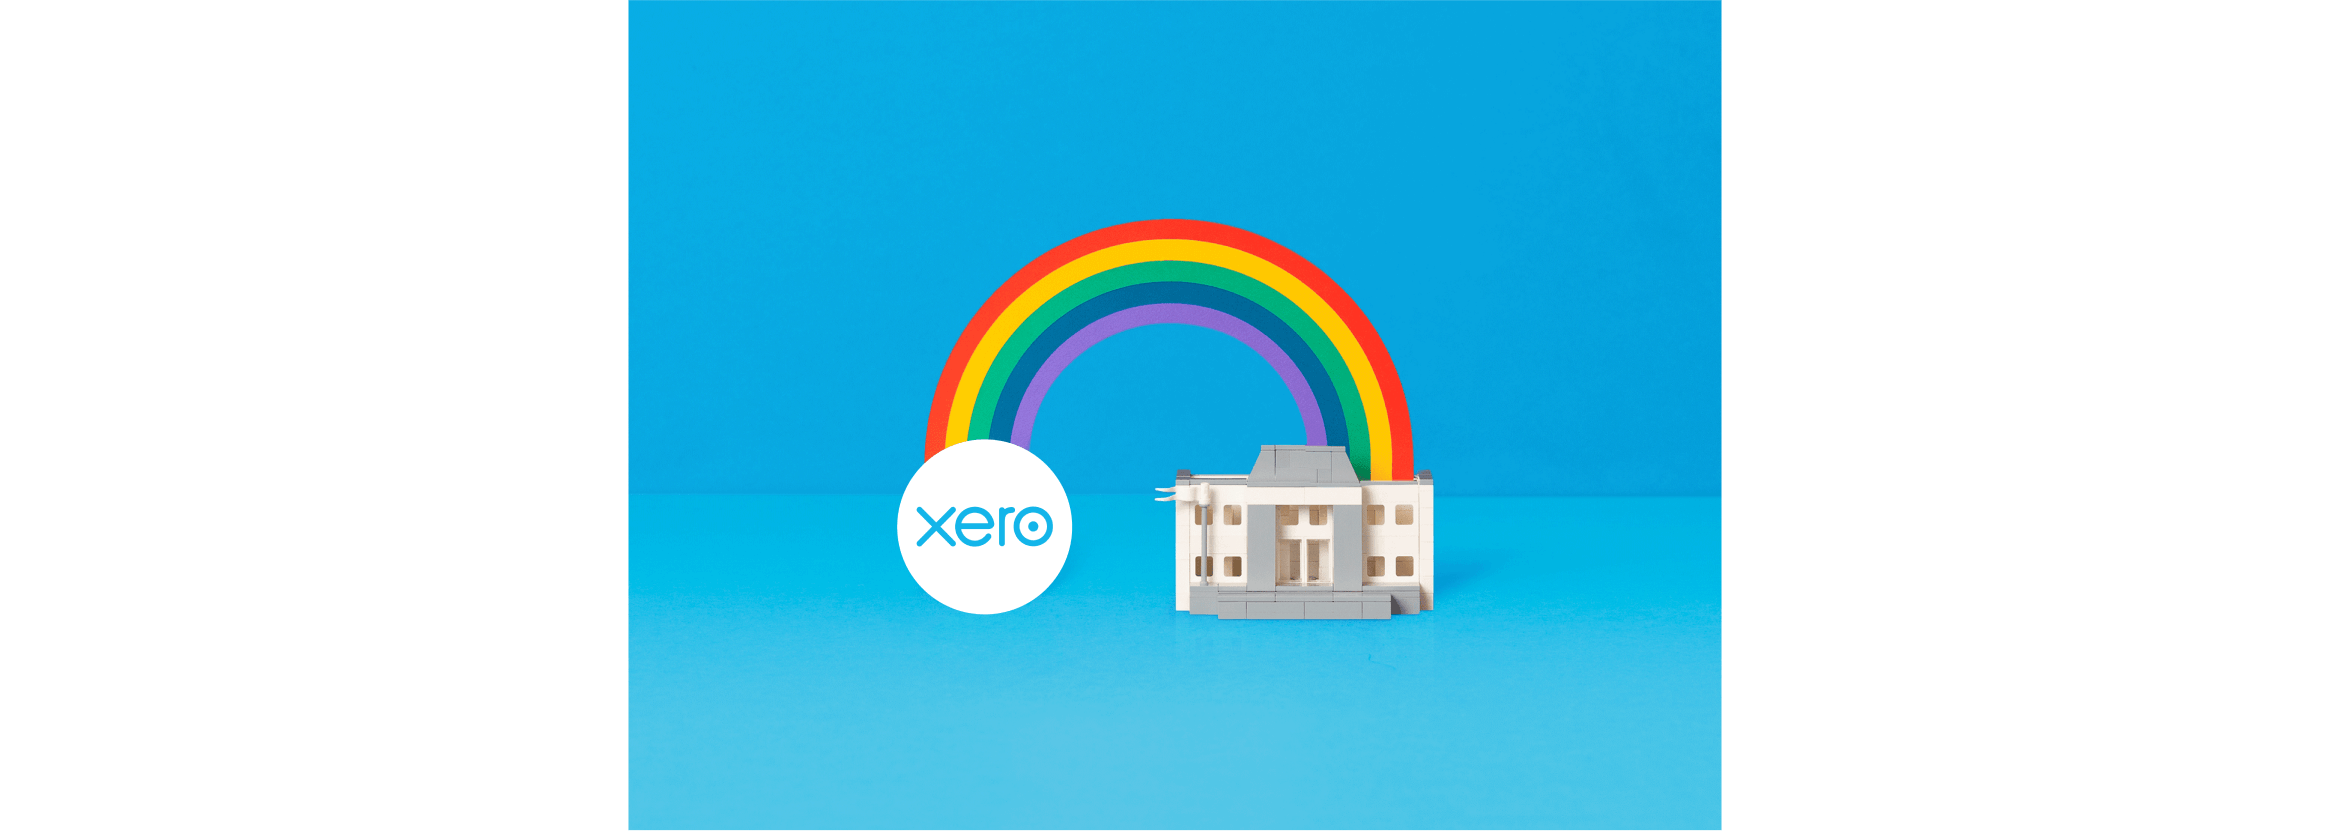 An illustration of a Xero logo and bank building are bridged by a coloured rainbow